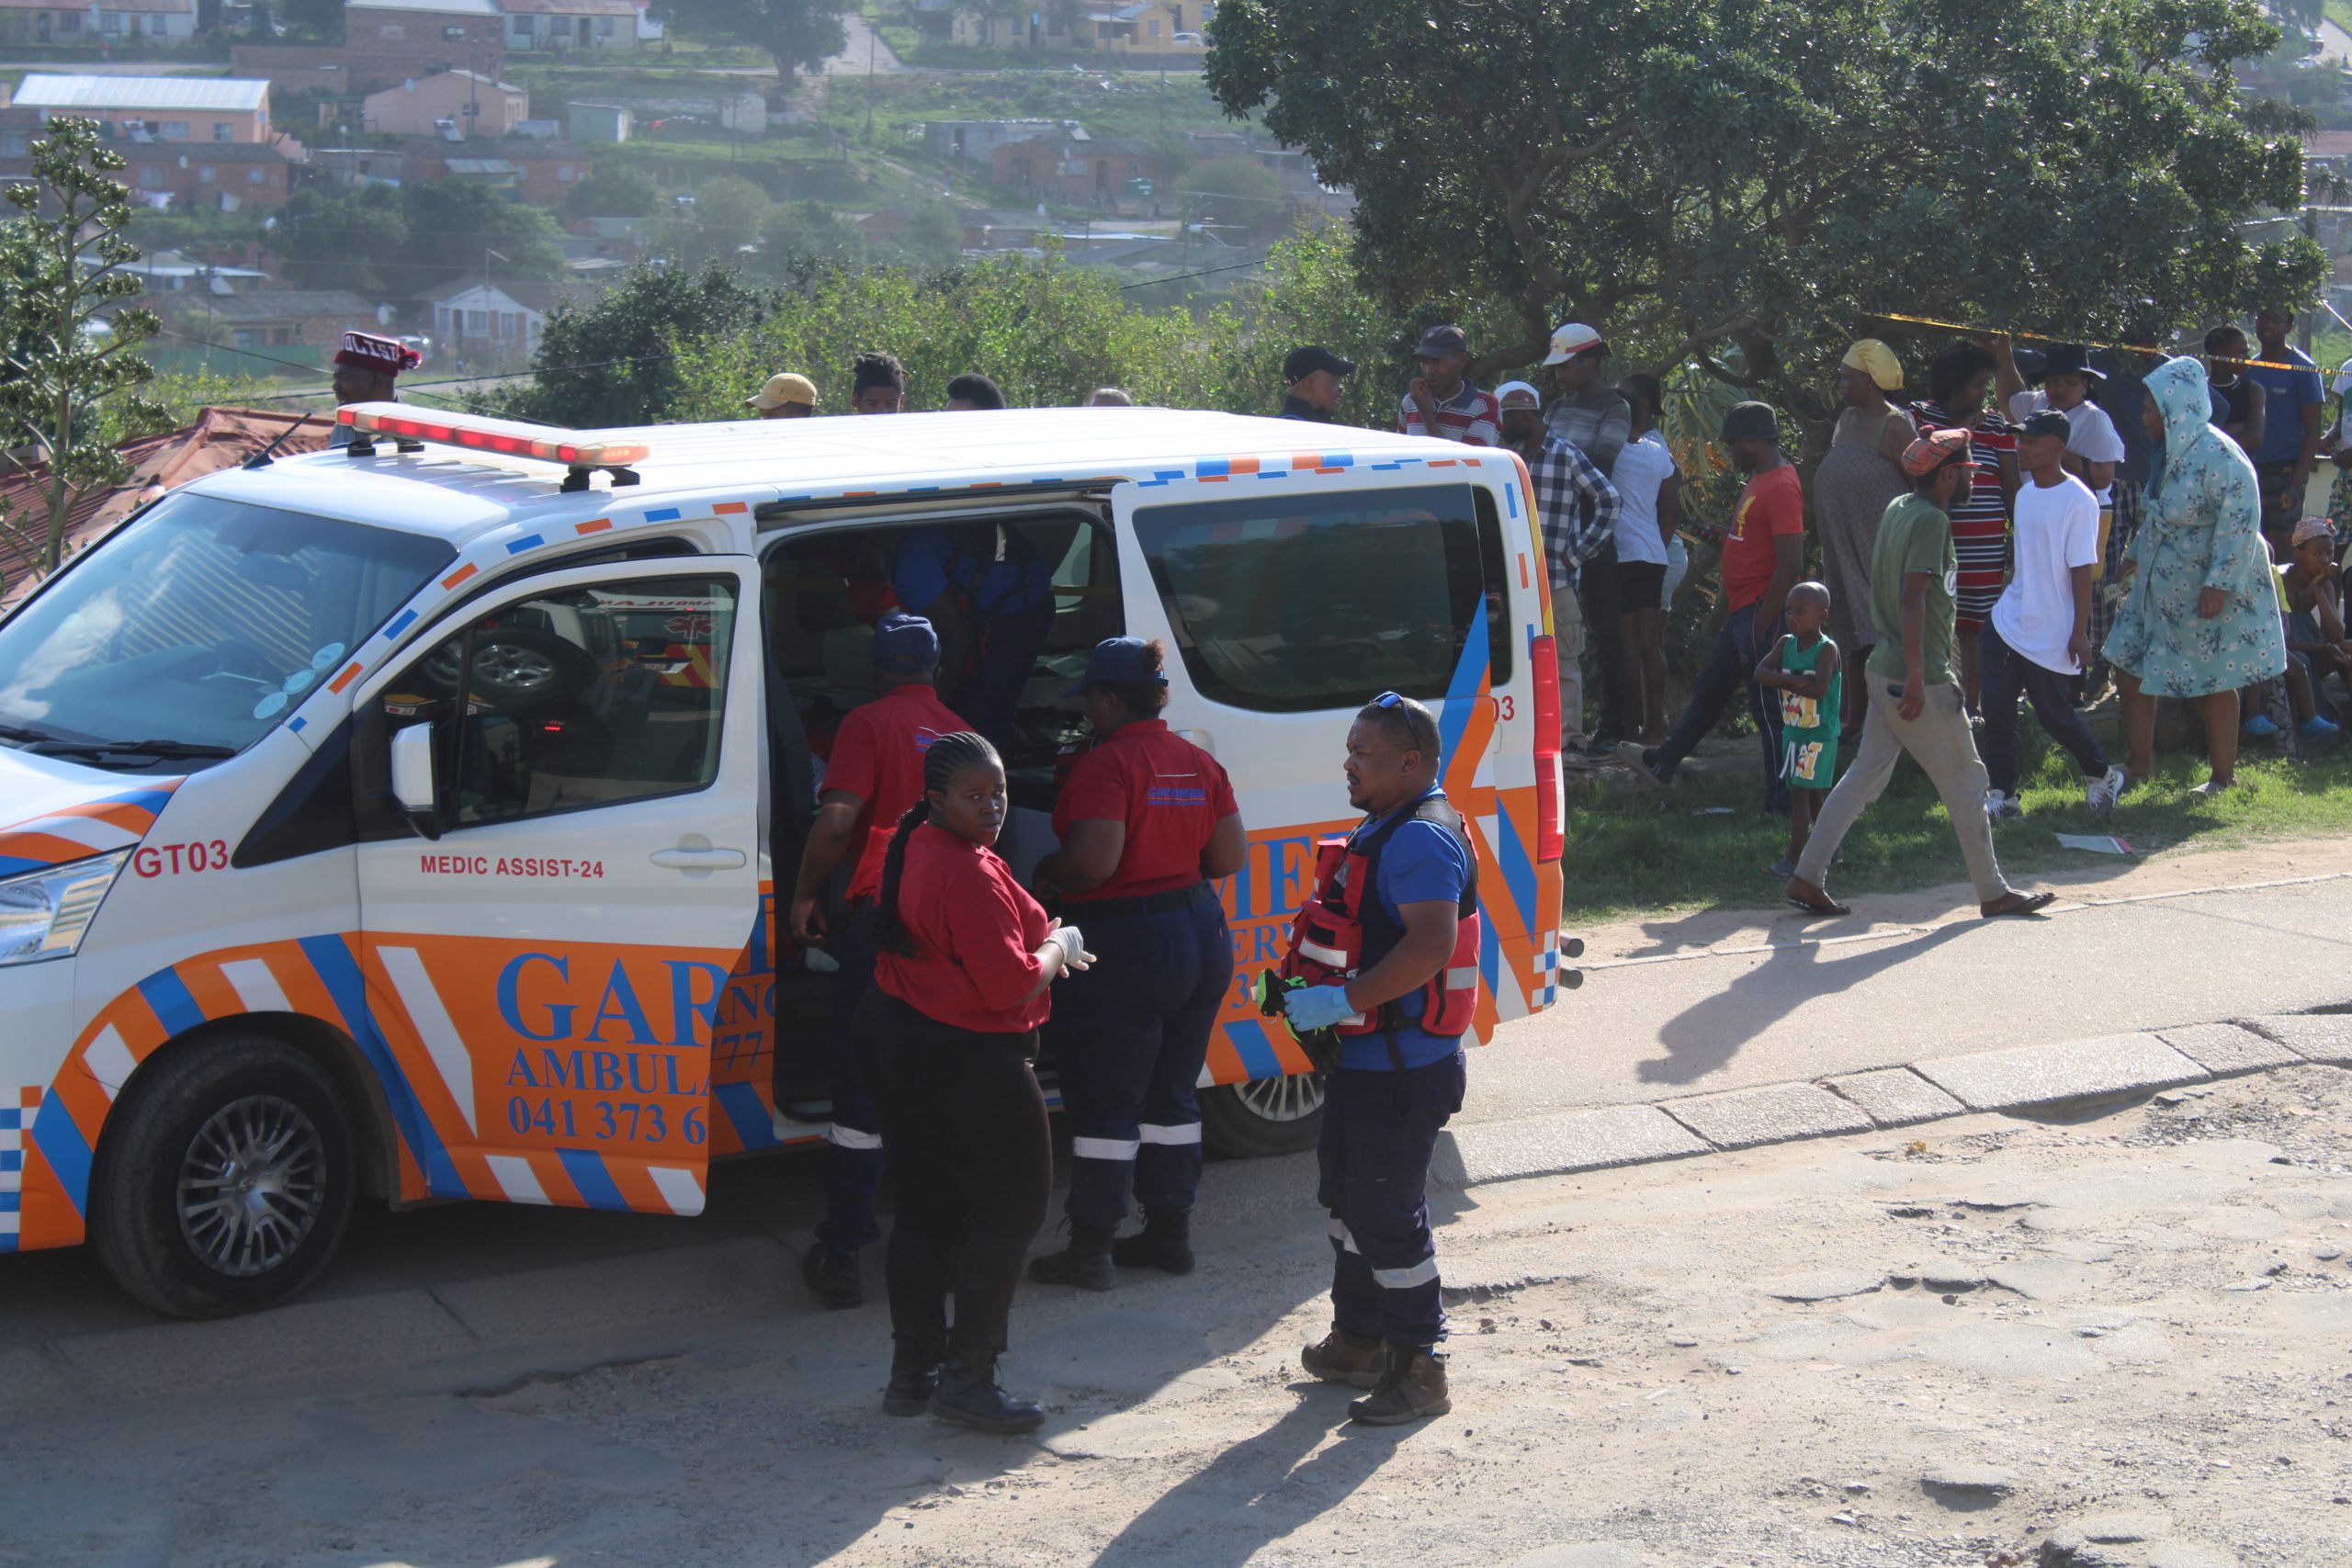 Paramedics pictured at the scene of a taxi accident that killed six people in Makhanda's "O" Street on Saturday afternoon. Photo: Luvuyo Mjekula